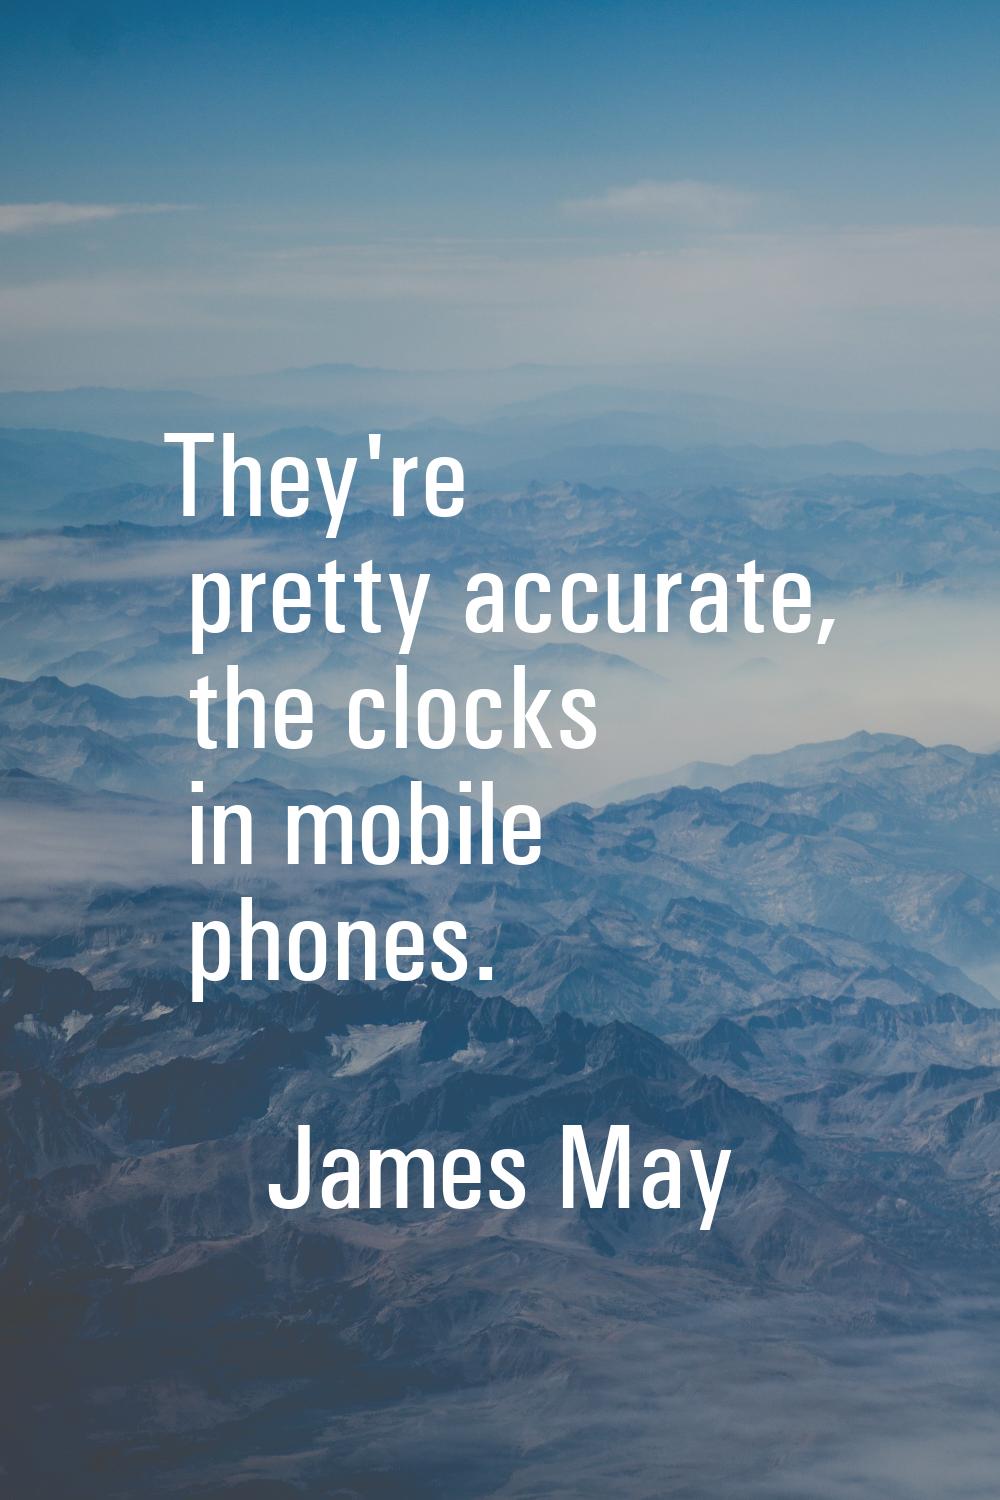 They're pretty accurate, the clocks in mobile phones.